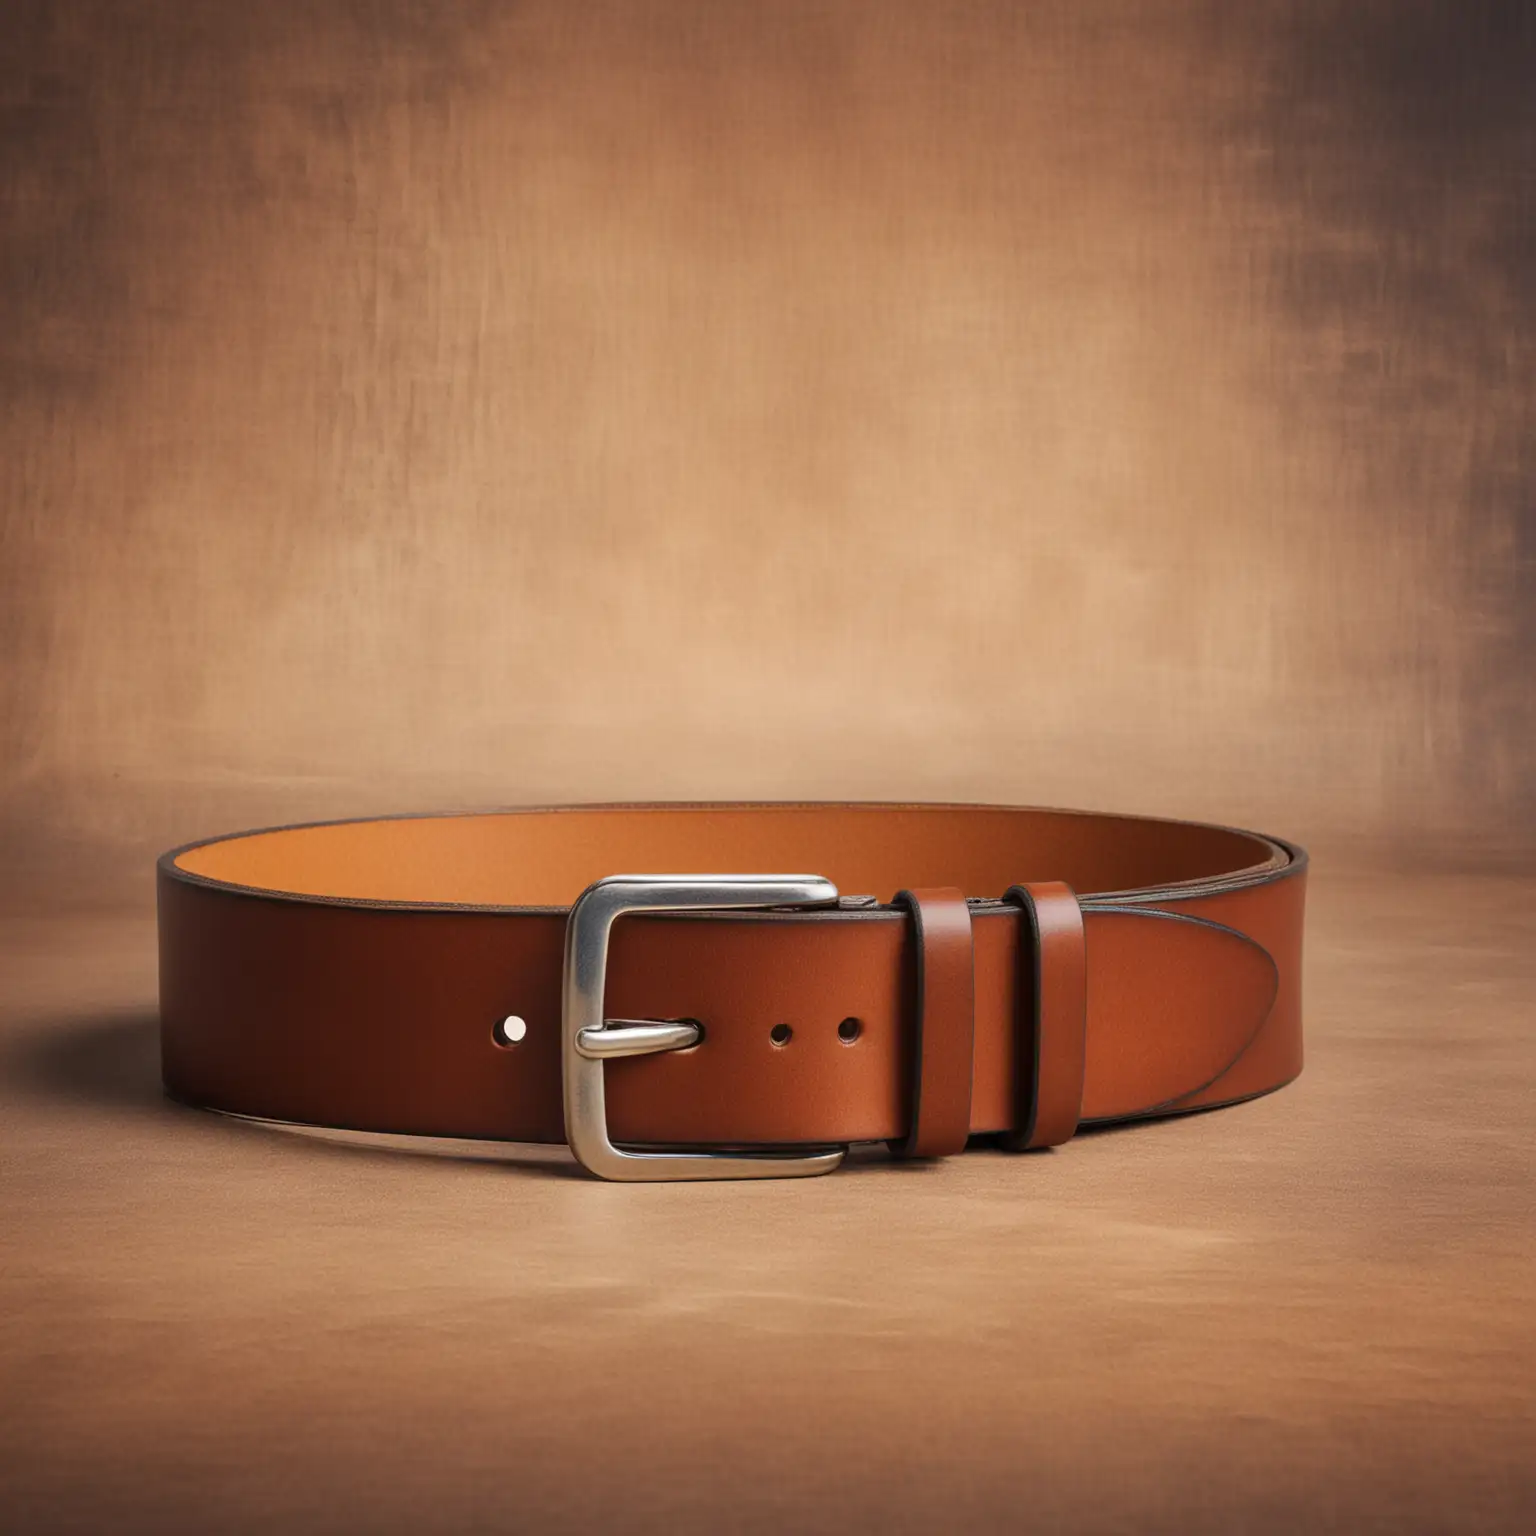 Stylish Leather Belt on an Artistic Textured Background